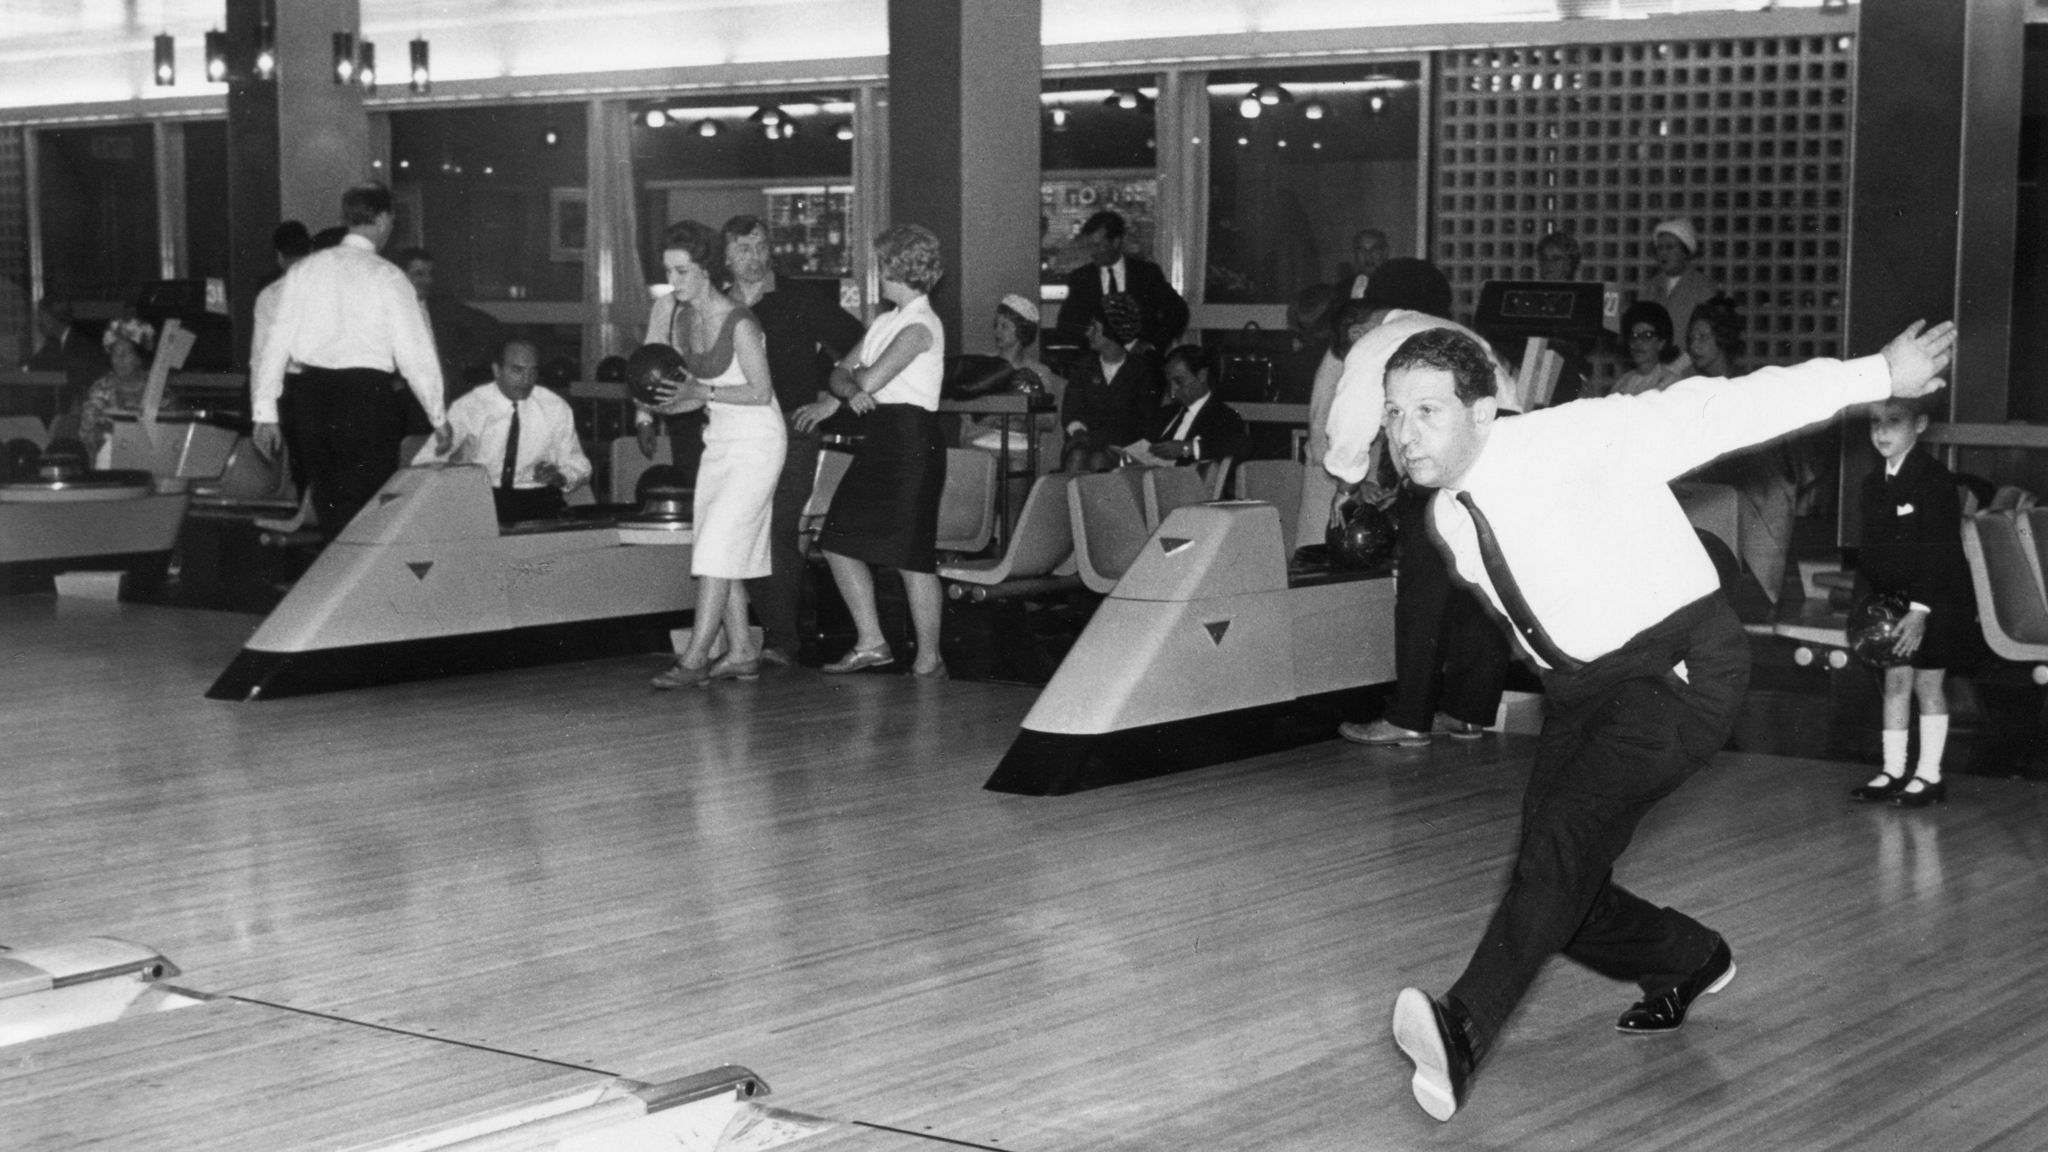 The bowling alley at the Merrion Centre